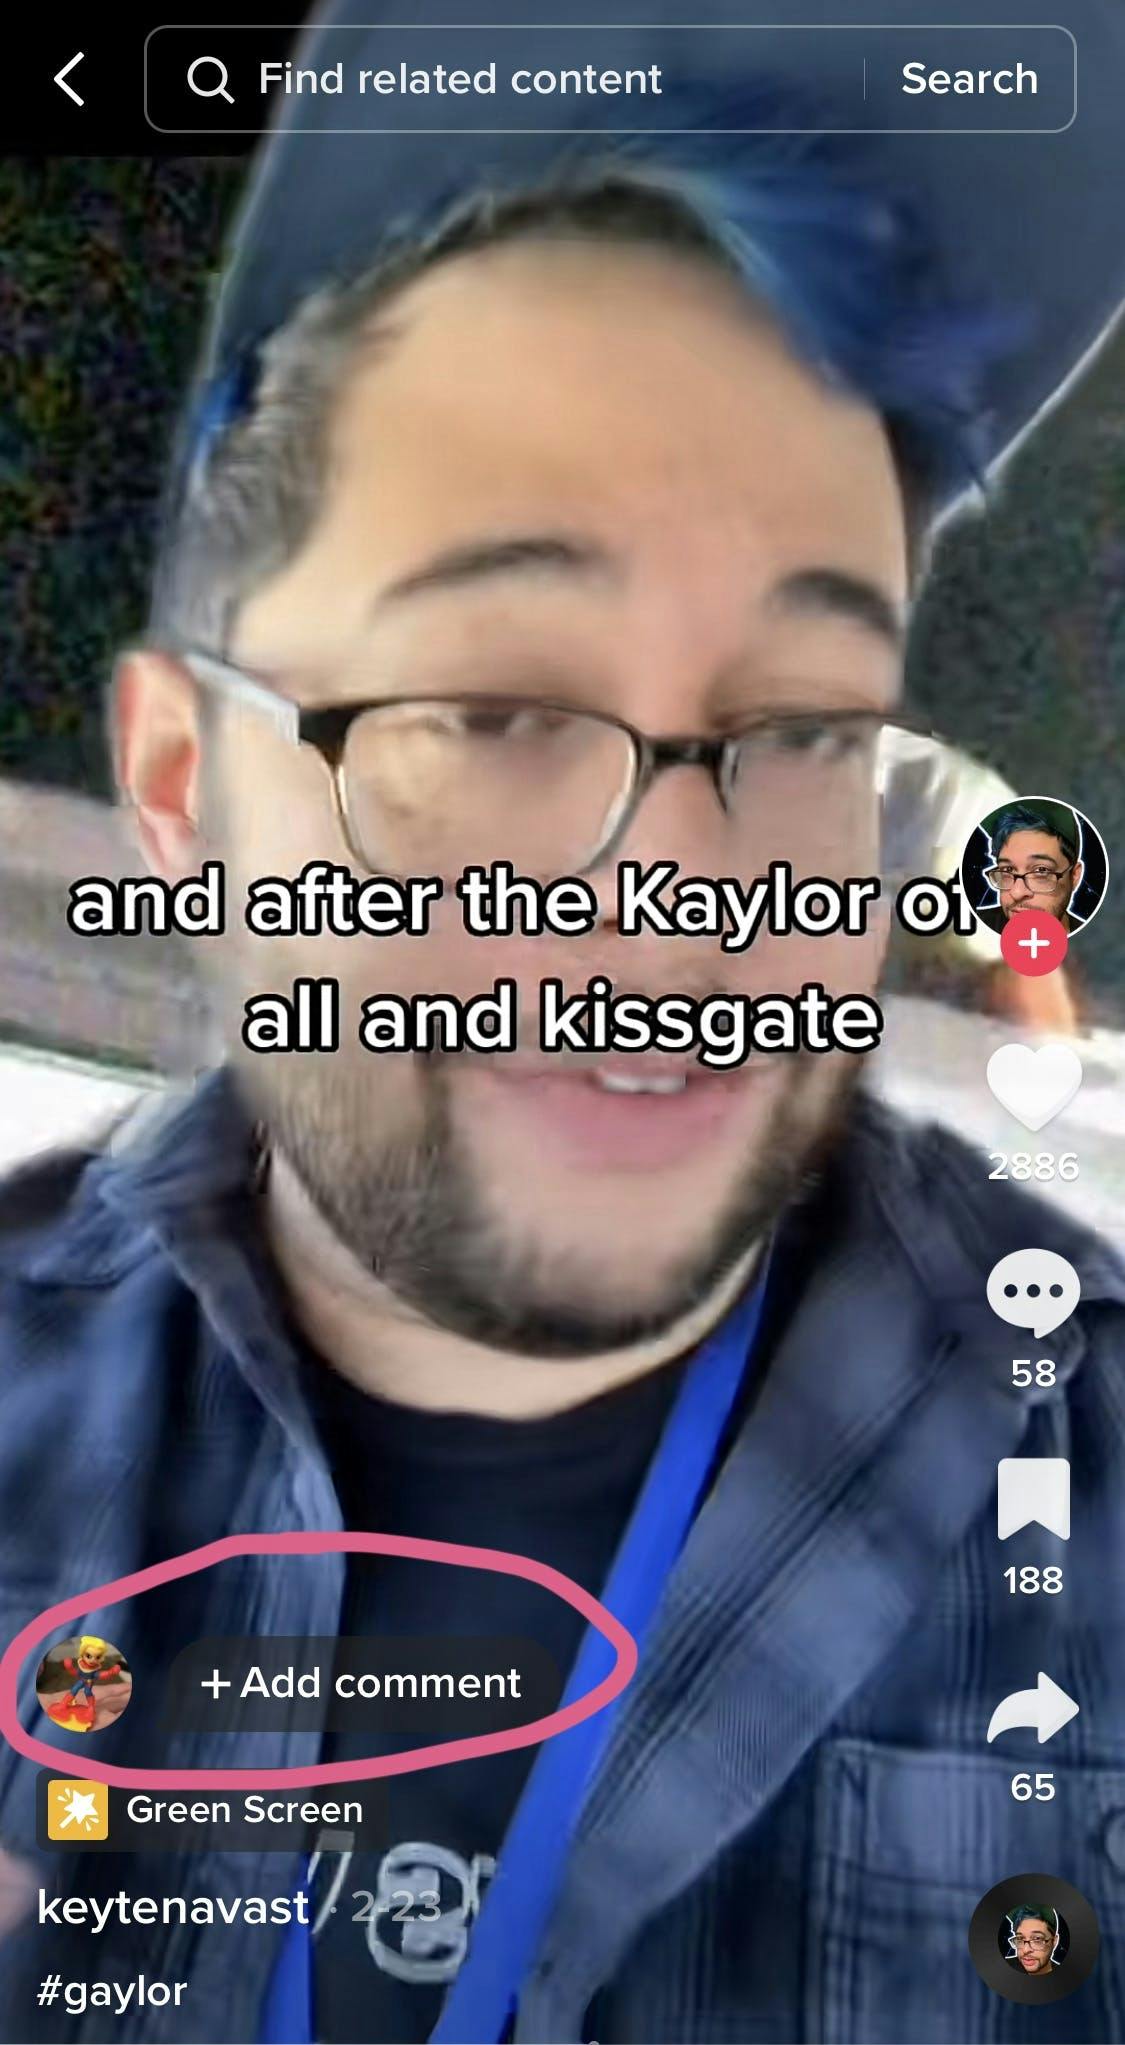 A TikTok video with the "Add comment" option circled